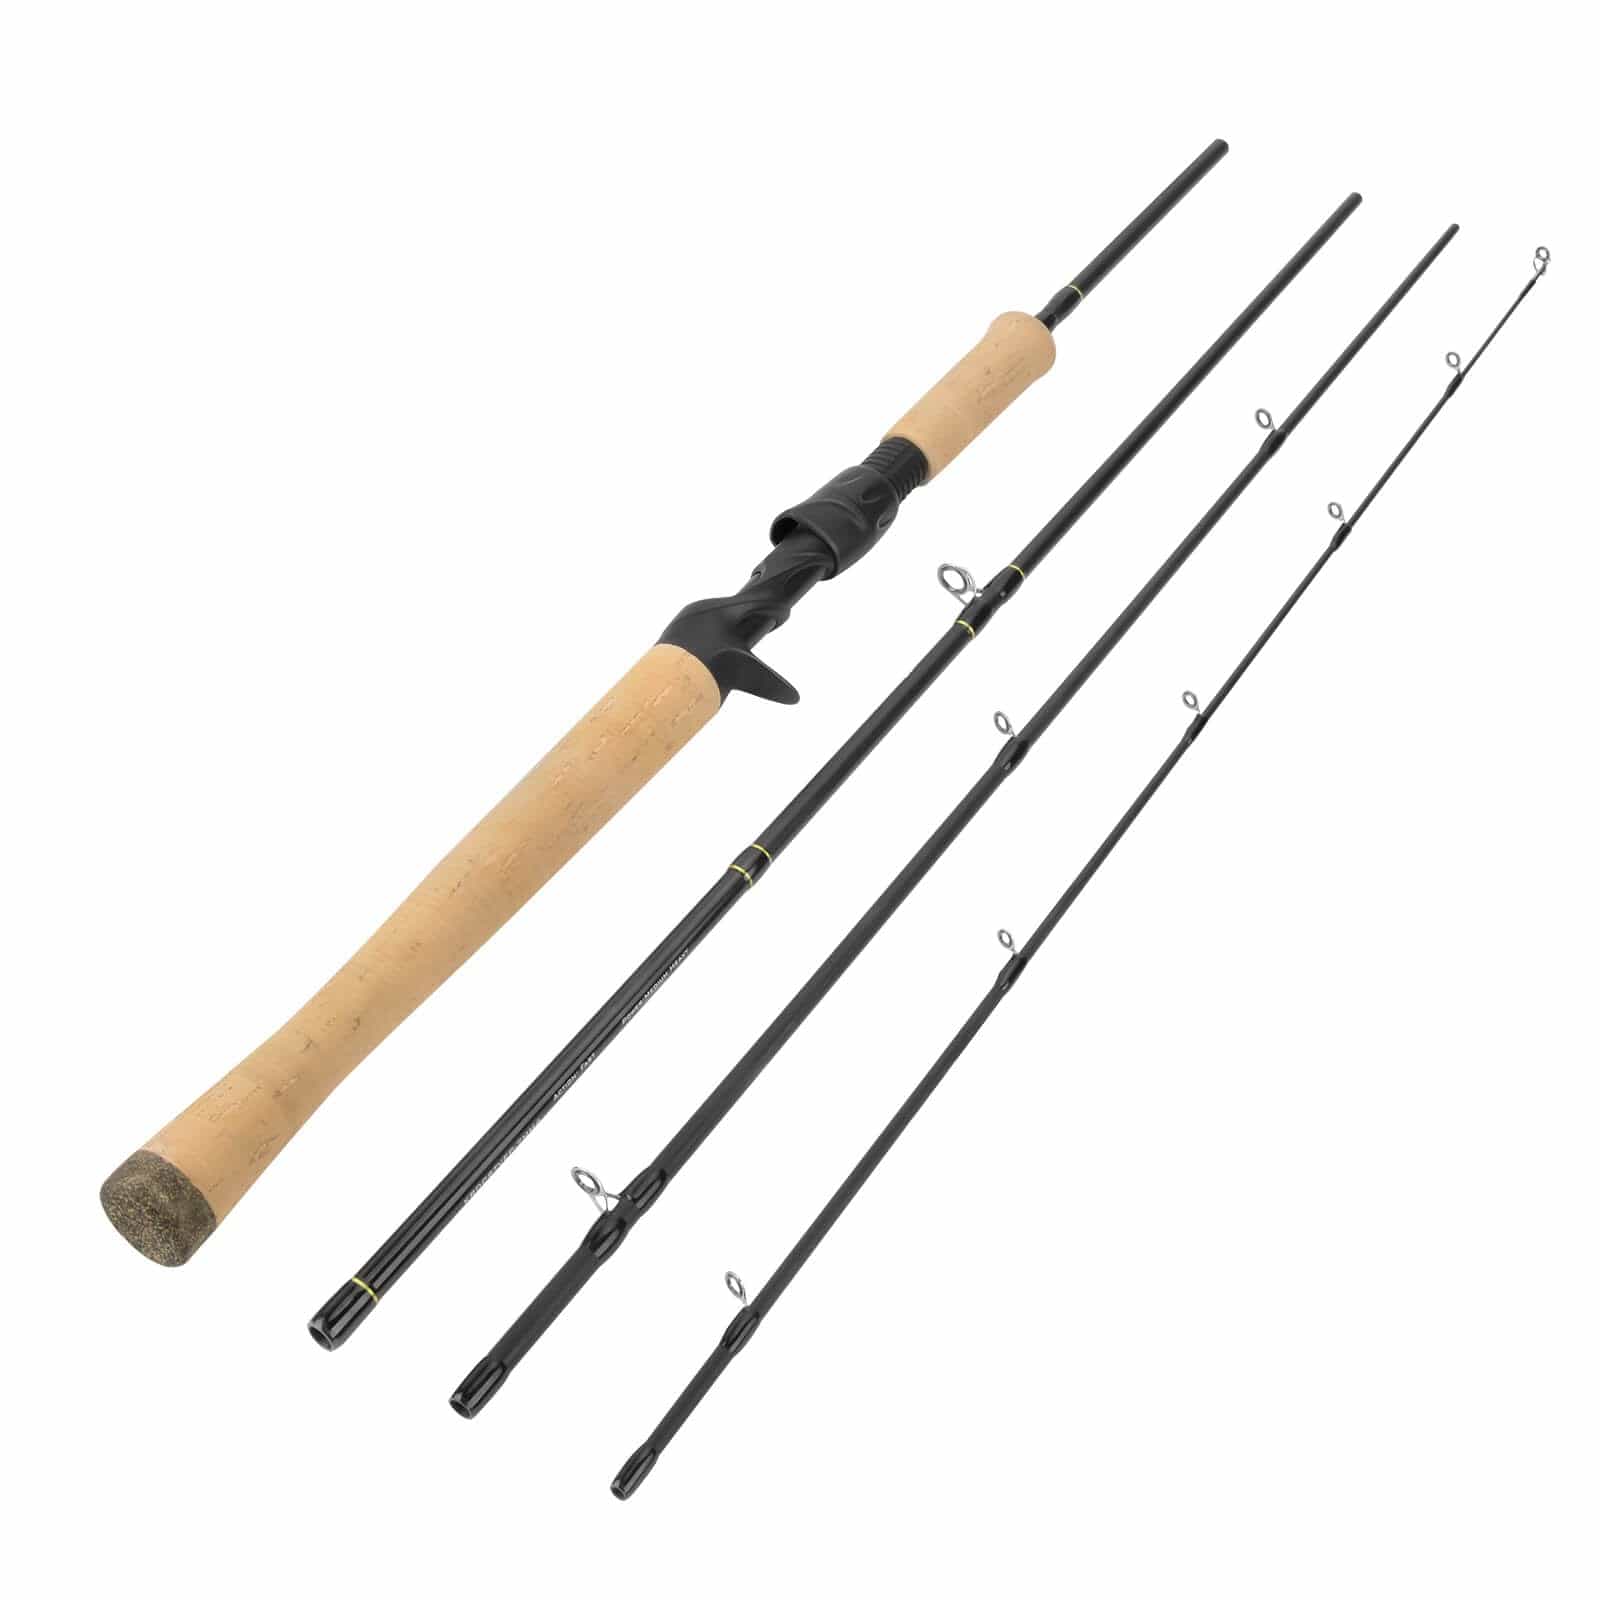 KastKing Compass Telescopic Fishing Rods and Combo, Sensitive Graphite  Composite Blank, Easy to Travel, Packs to Just 17 in Length, Stainless  Guides and Ceramic Rings, Combos w/ 4+1BB Spinning Reel